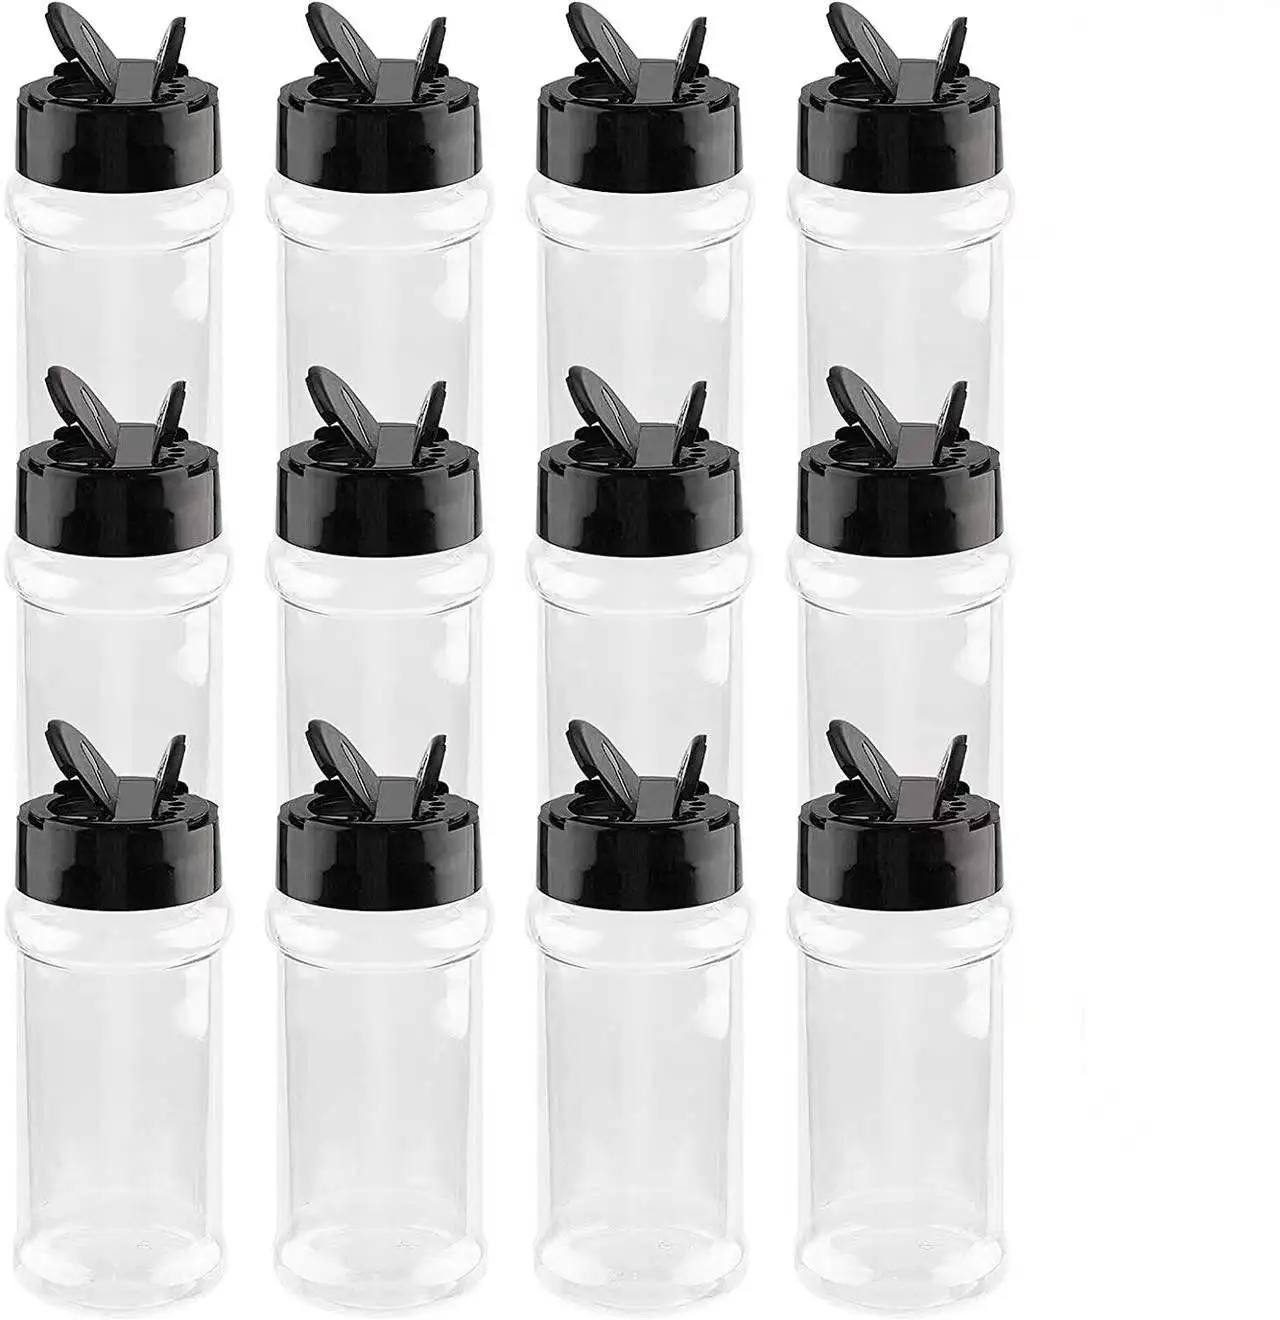 Bekith 20 Pack 4 Ounce Clear Plastic Storage Jars Containers with